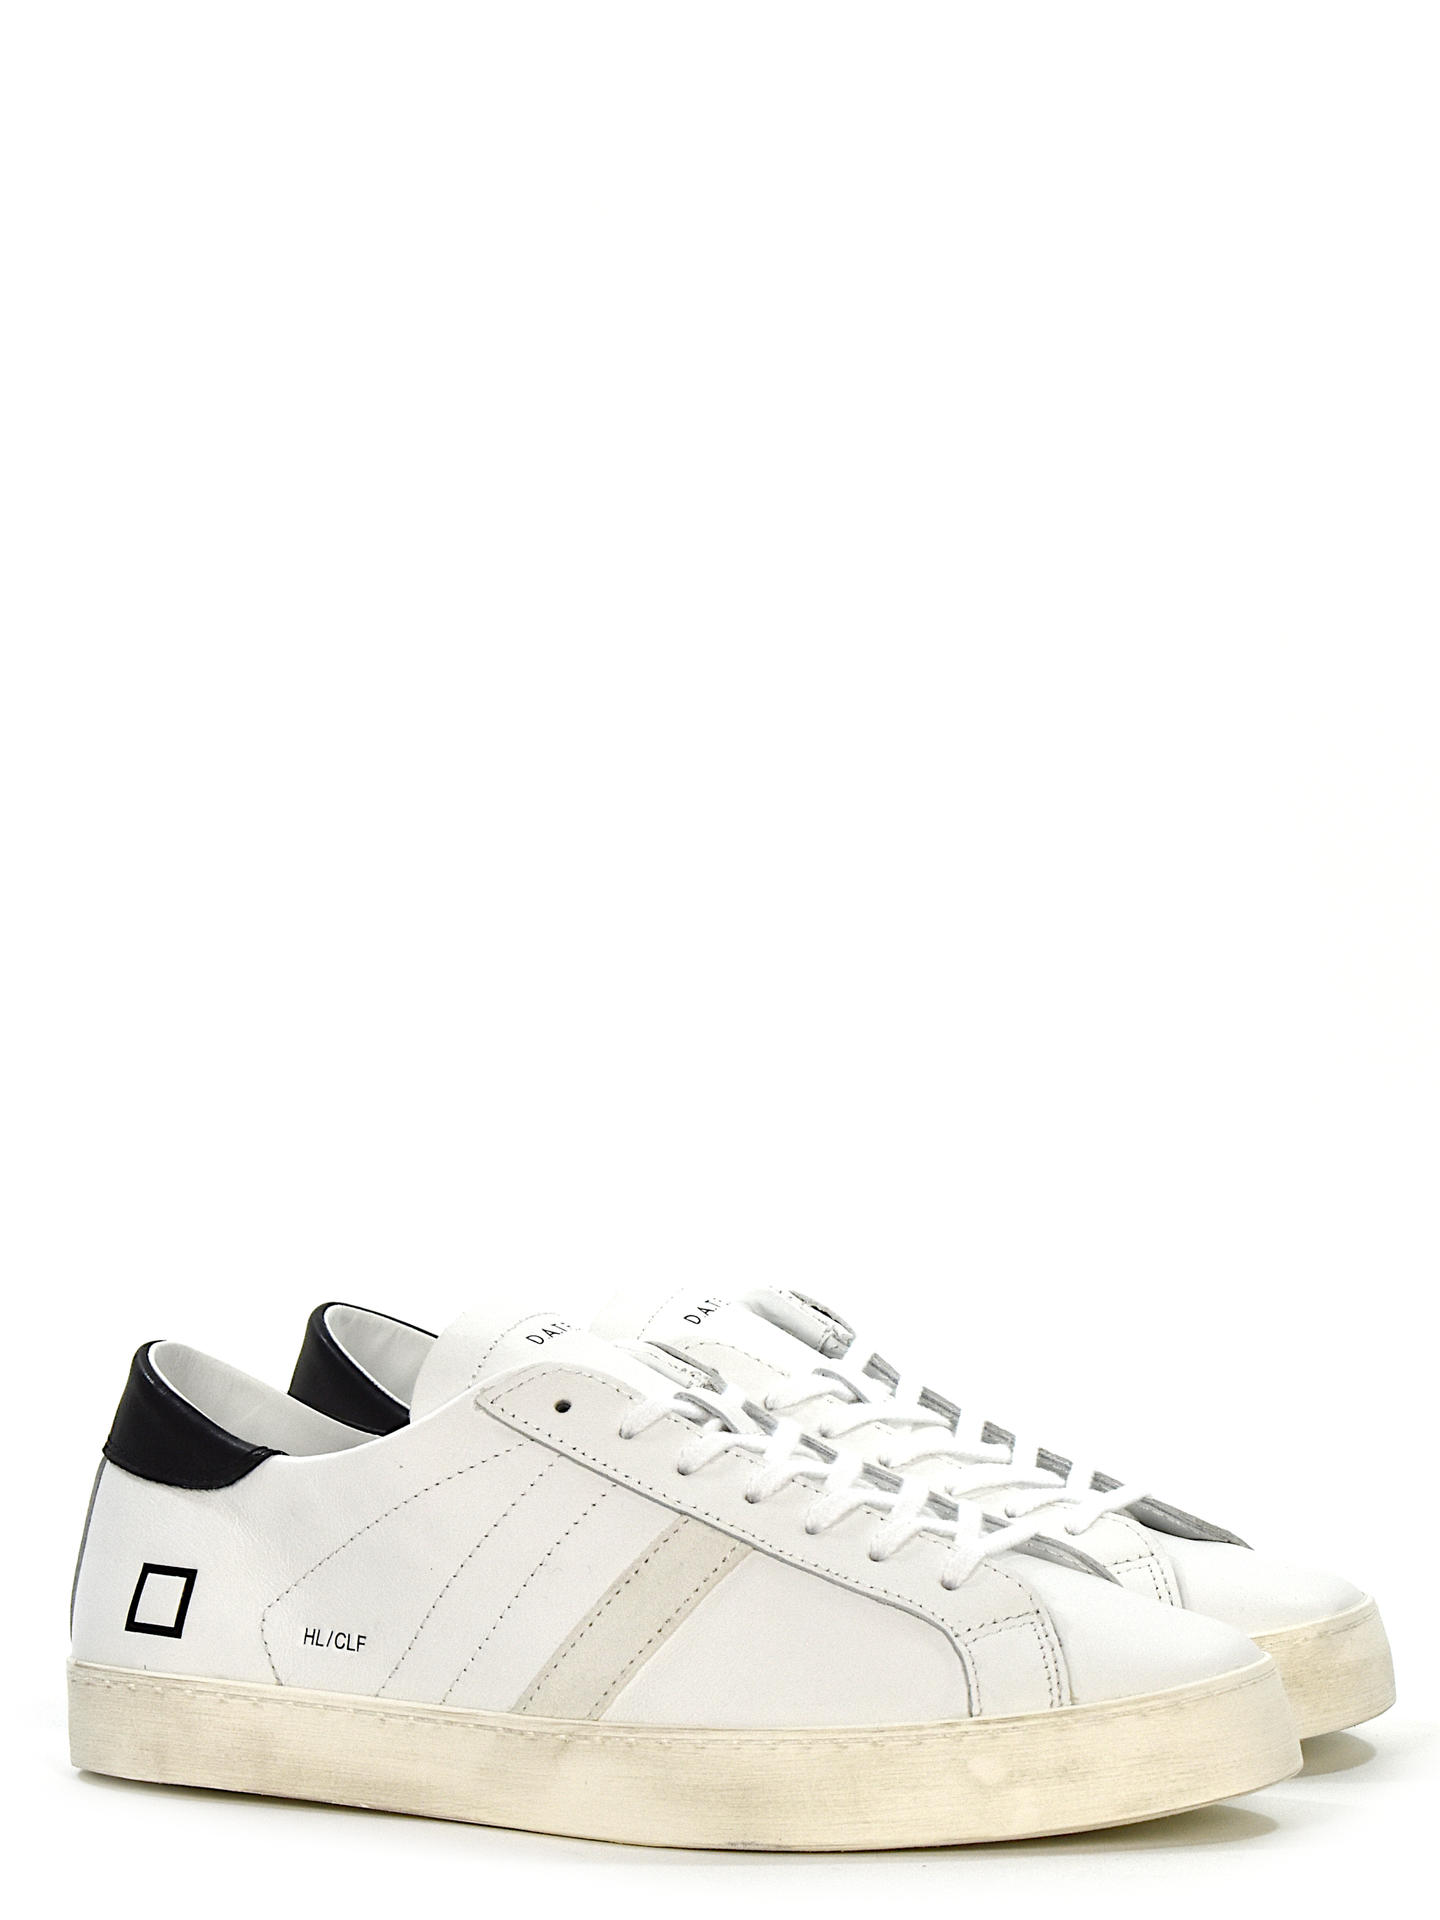 SNEAKERS D.A.T.E HLCAWB BIANCO/NERO